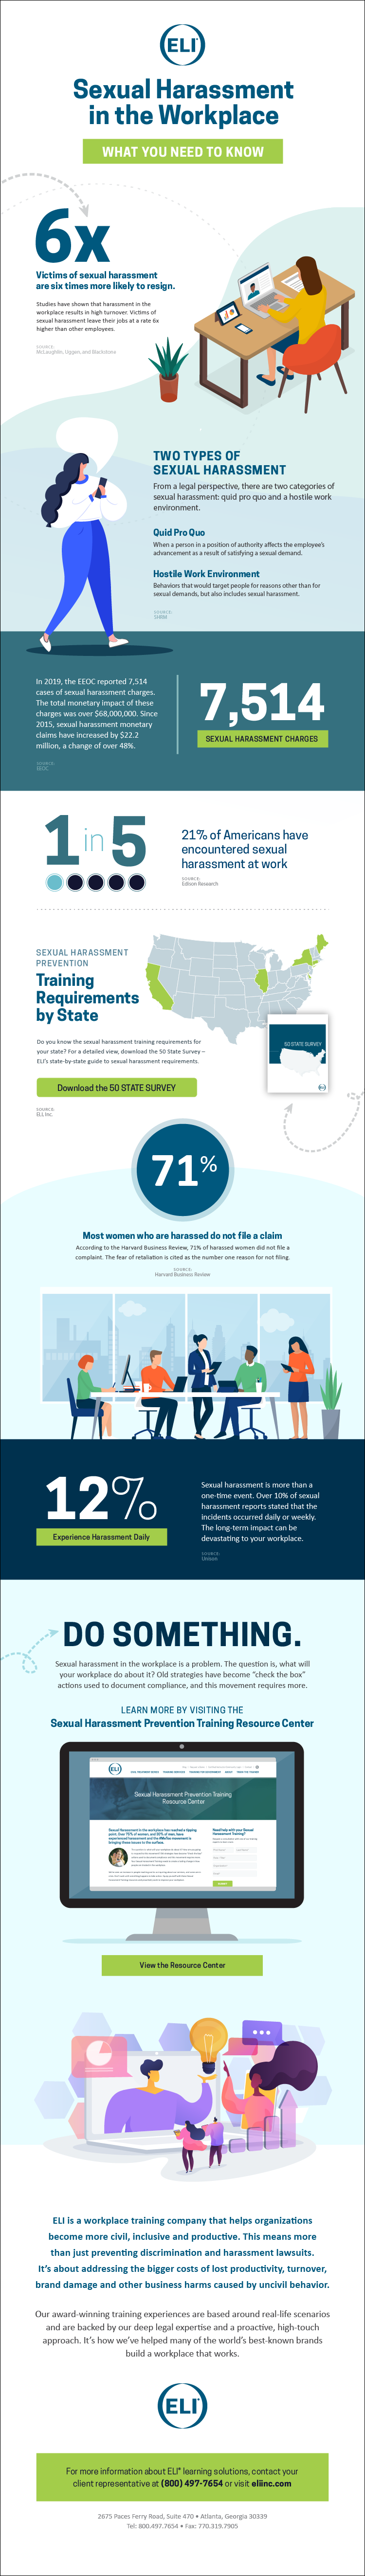 Sexual Harassment in the Workplace: What You Need to Know Infographic